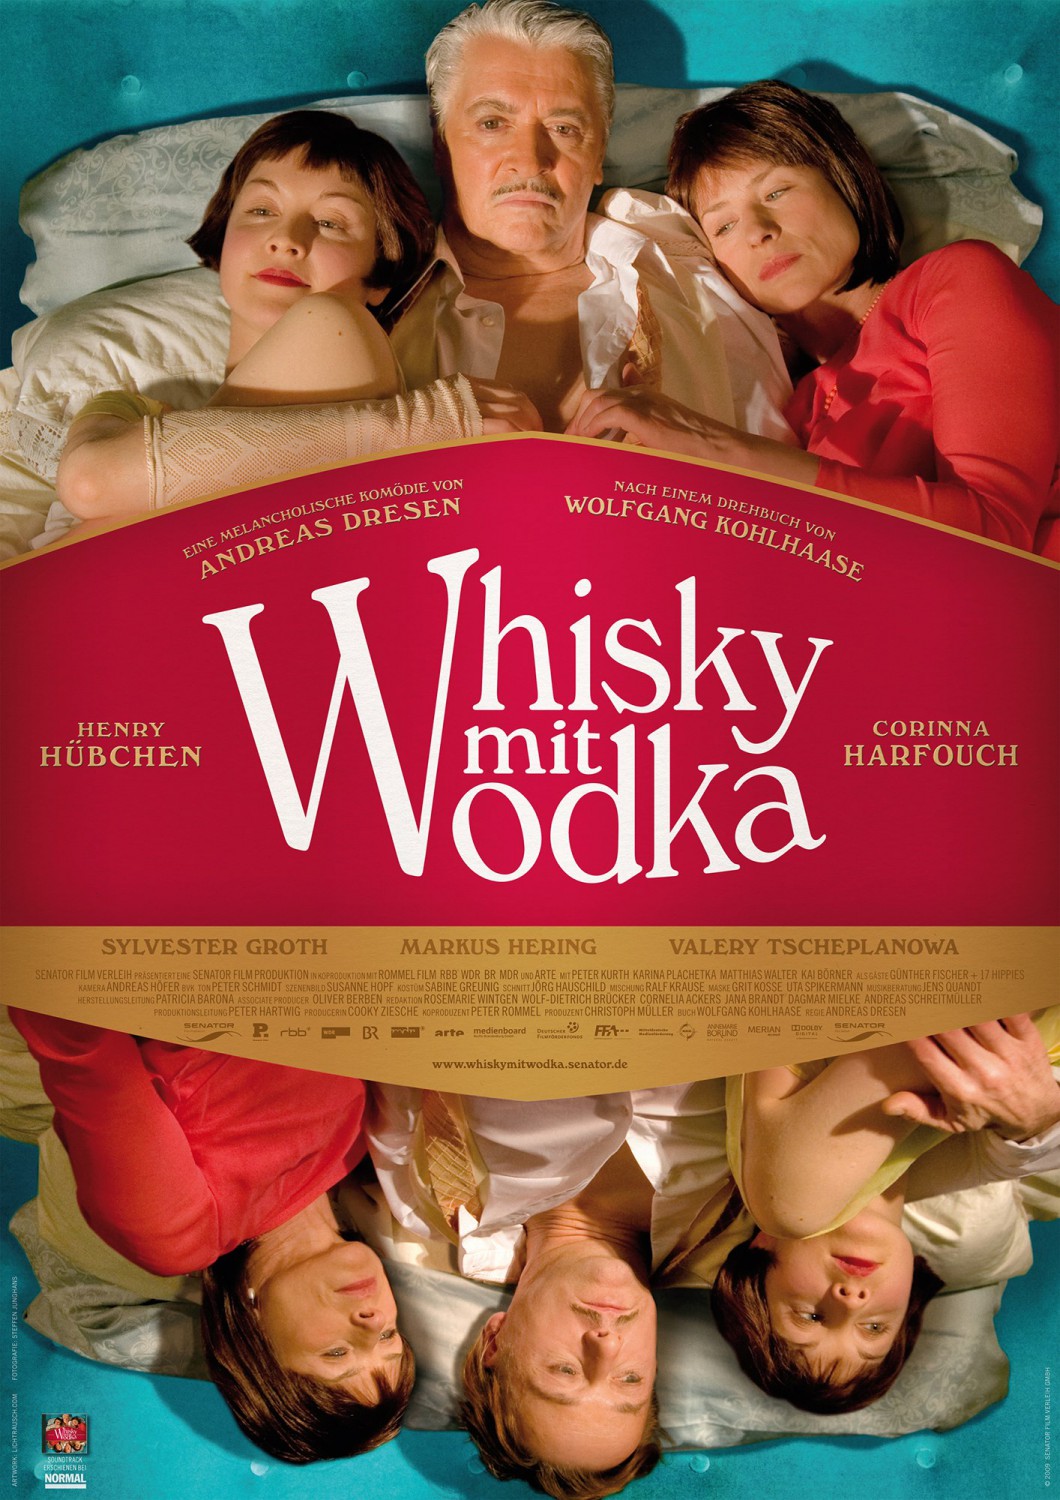 Extra Large Movie Poster Image for Whisky mit Wodka 